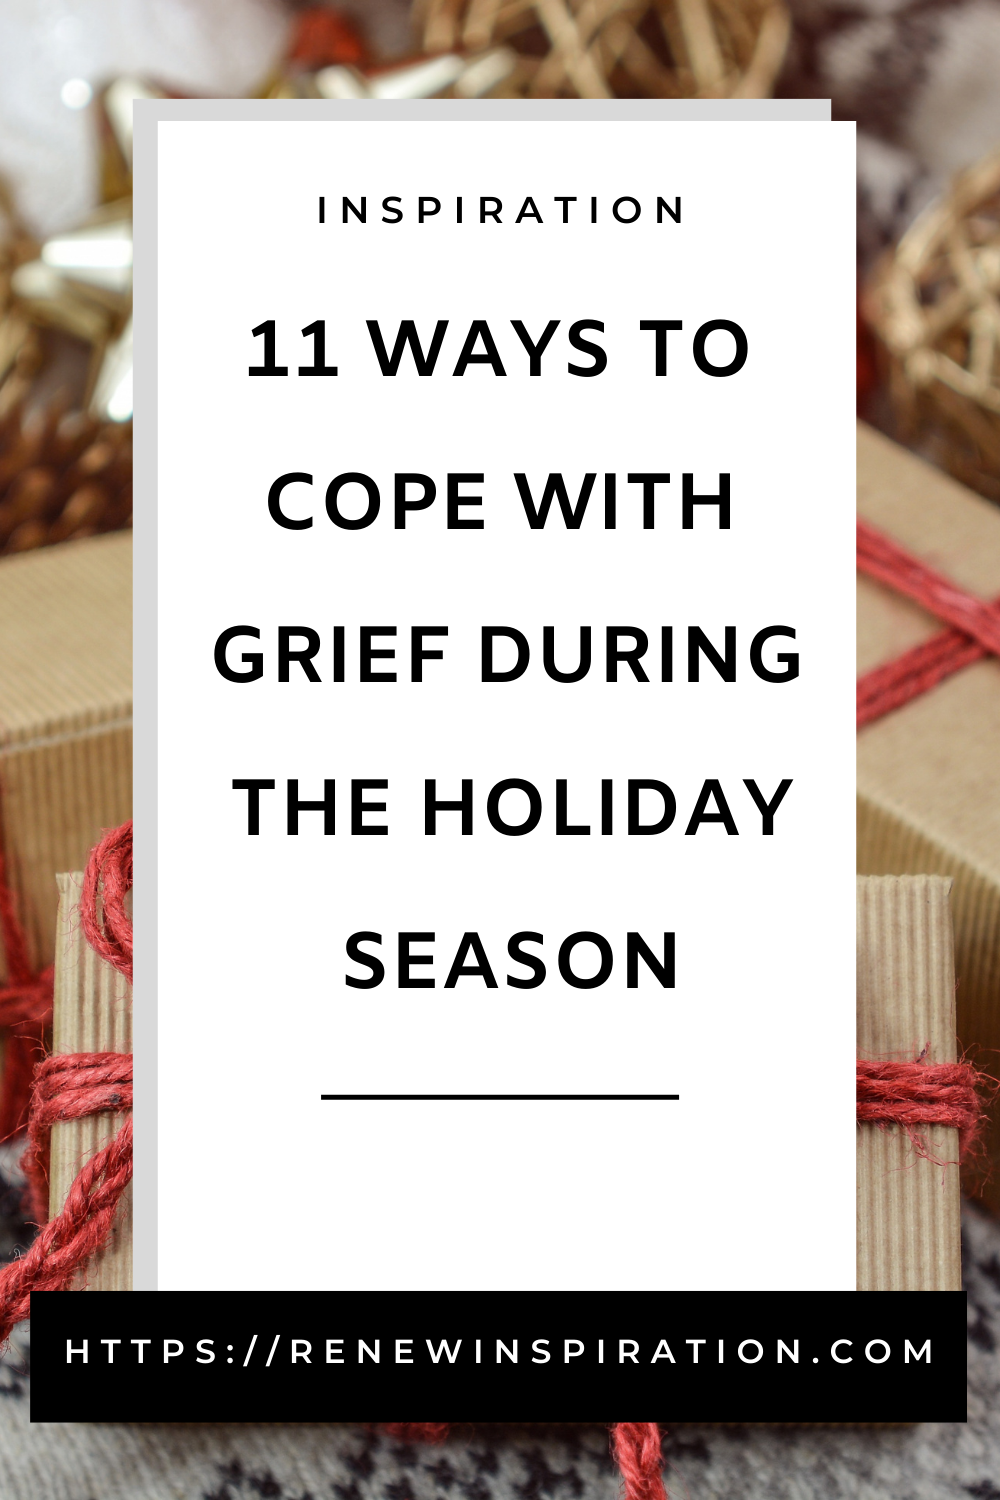 Renew Inspiration, 11 Ways to Cope with Grief During the Holiday Season